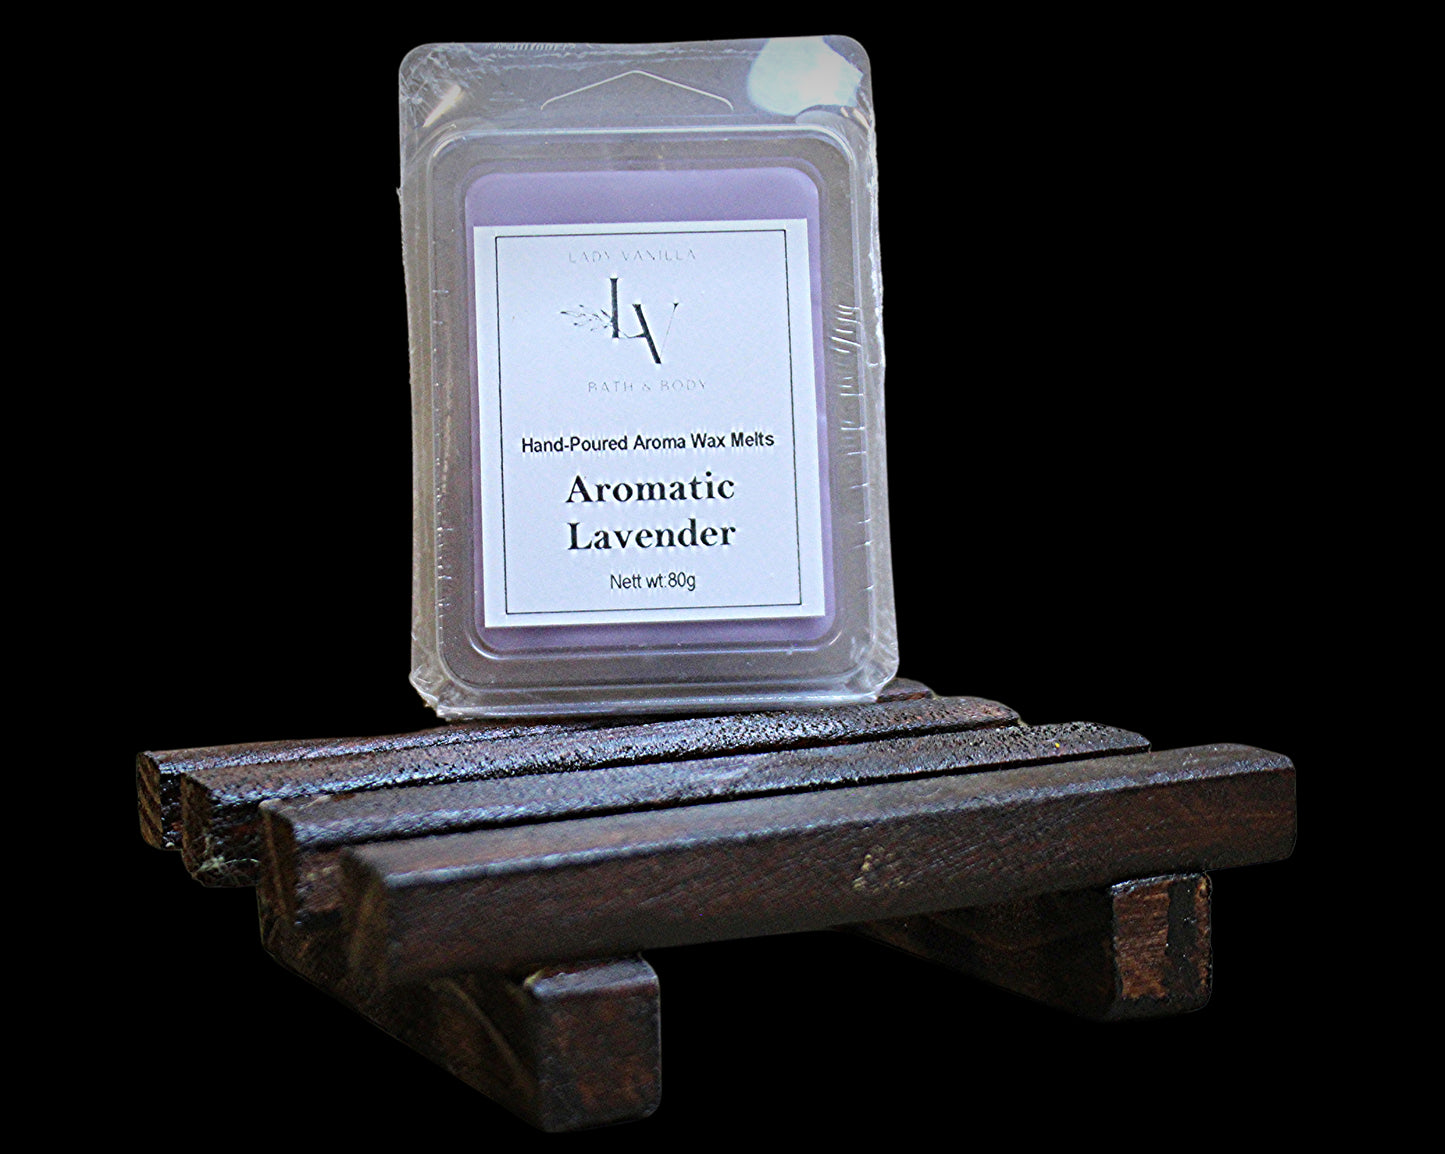 Aromatic Lavender Clamshell Waxmelt